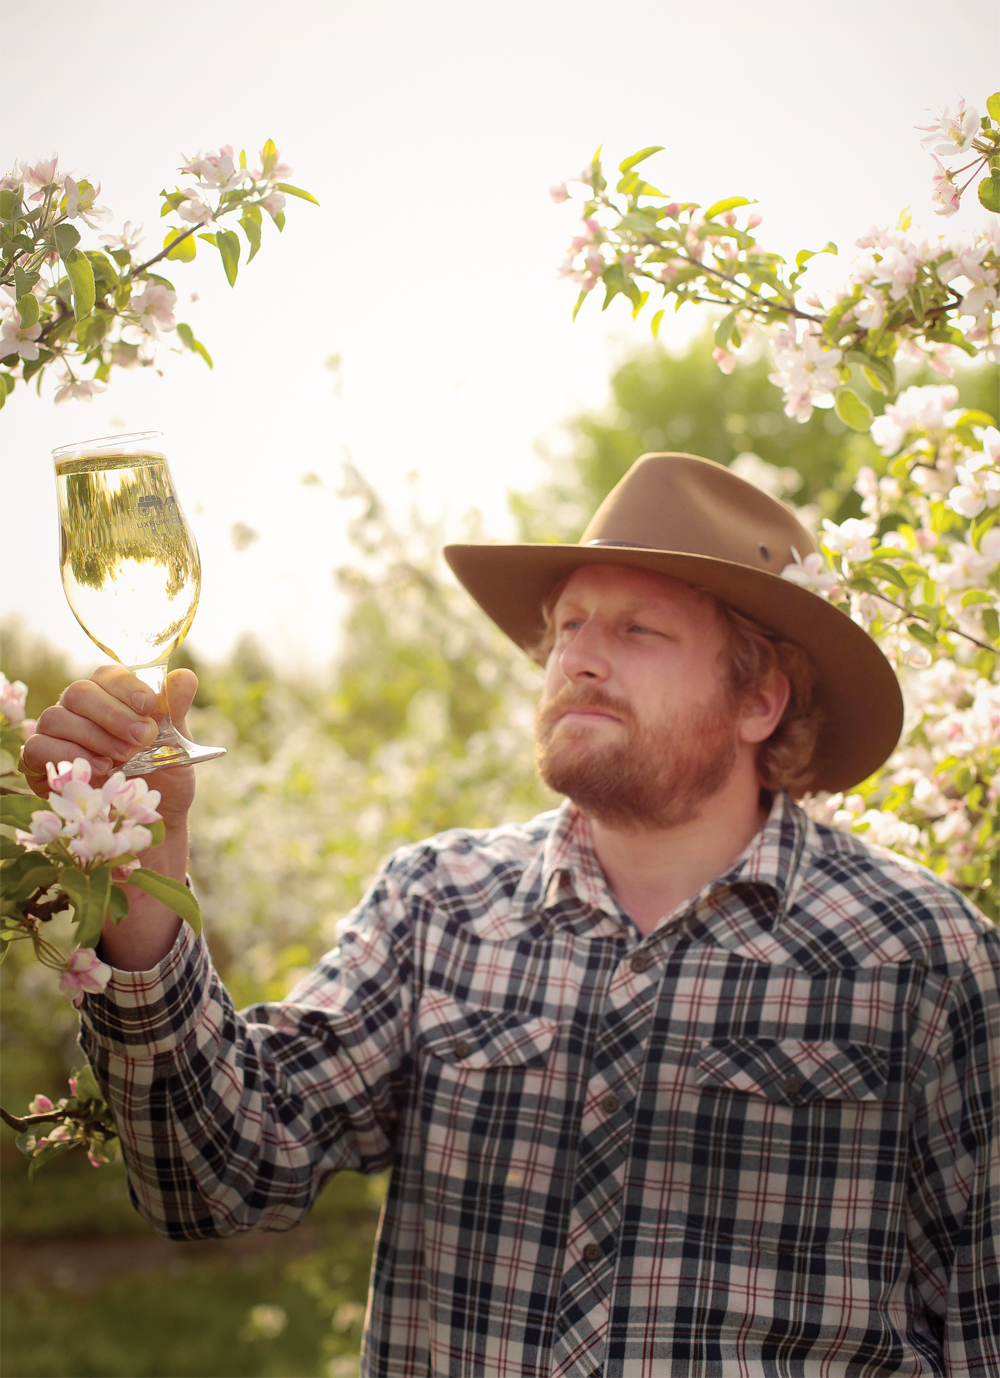 Coffin Ridge Winery employee James McIntosh produces his own Duxbury Cider at Coffin Ridge and sells his product through the winery and in several dining and drinking establishments in Southern Georgian Bay and Toronto.